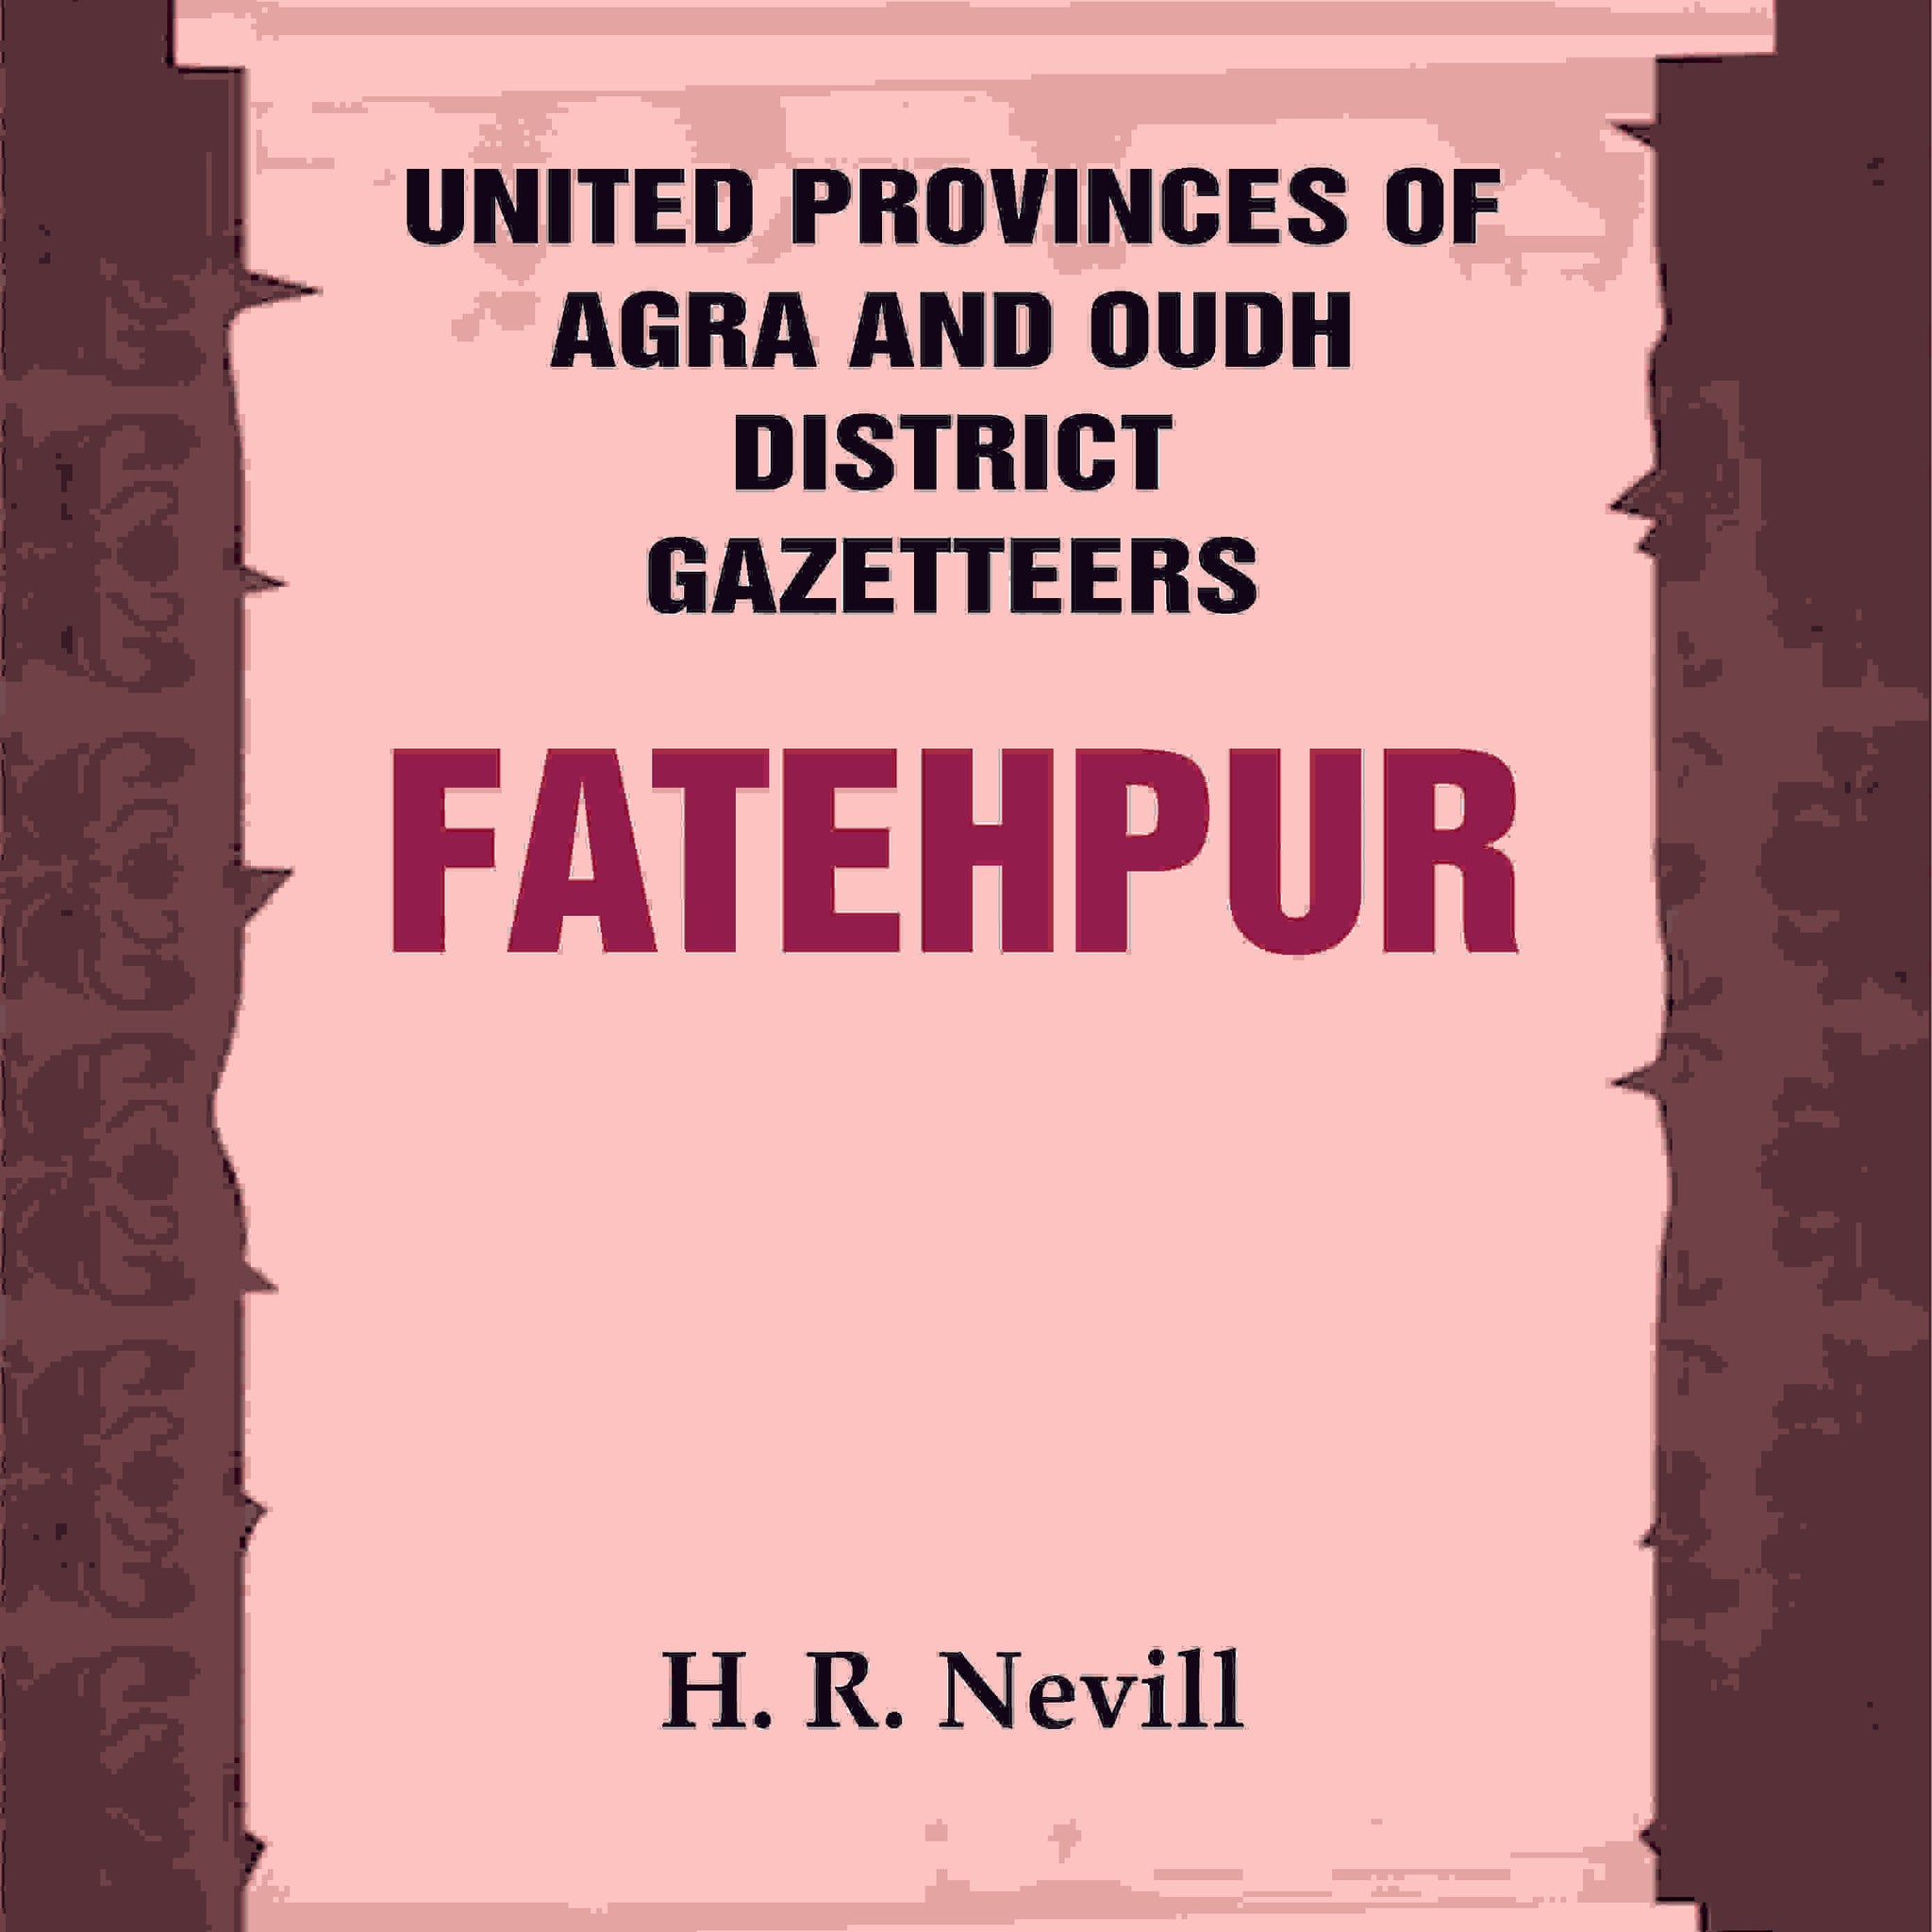 United Provinces of Agra and Oudh District Gazetteers: Fatehpur